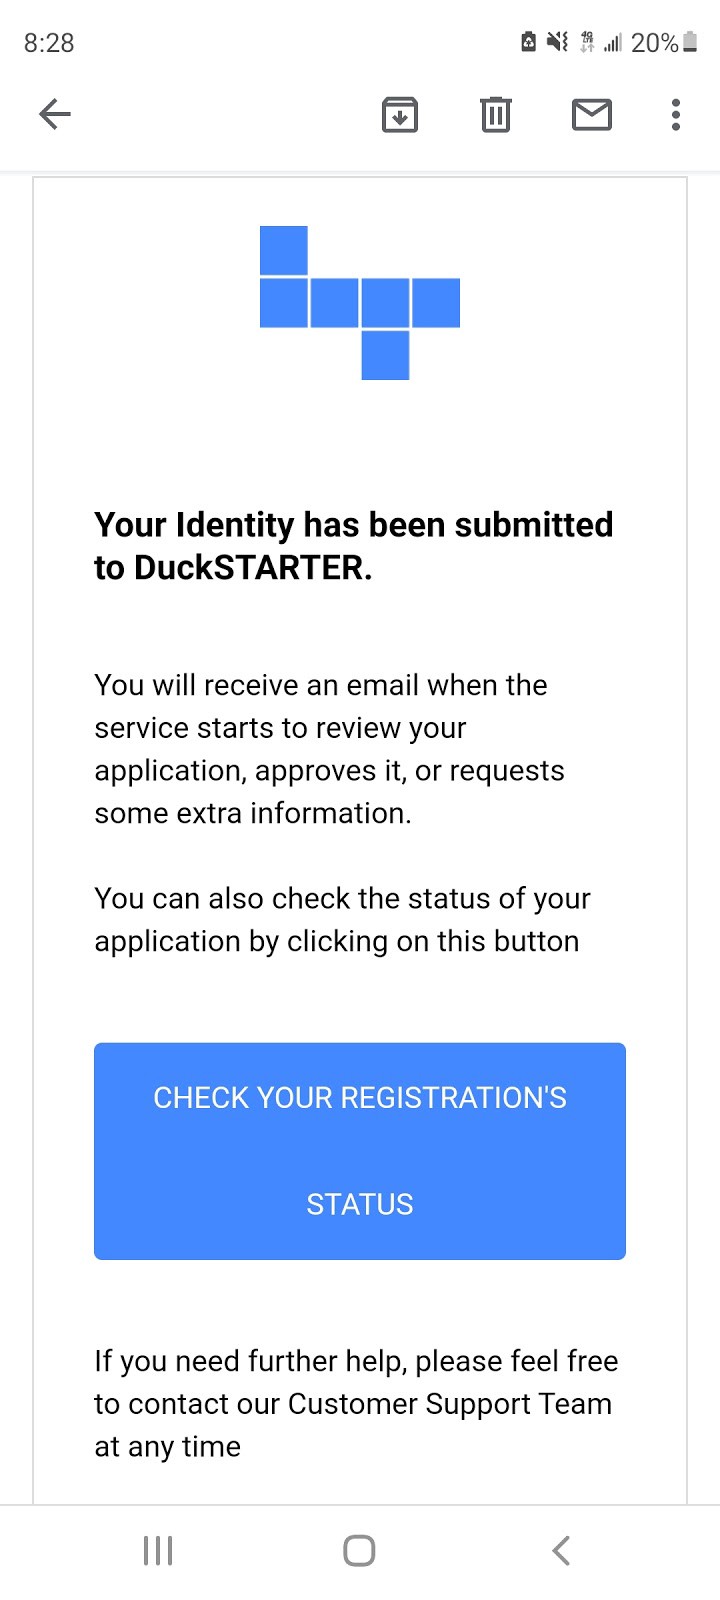 check your registration